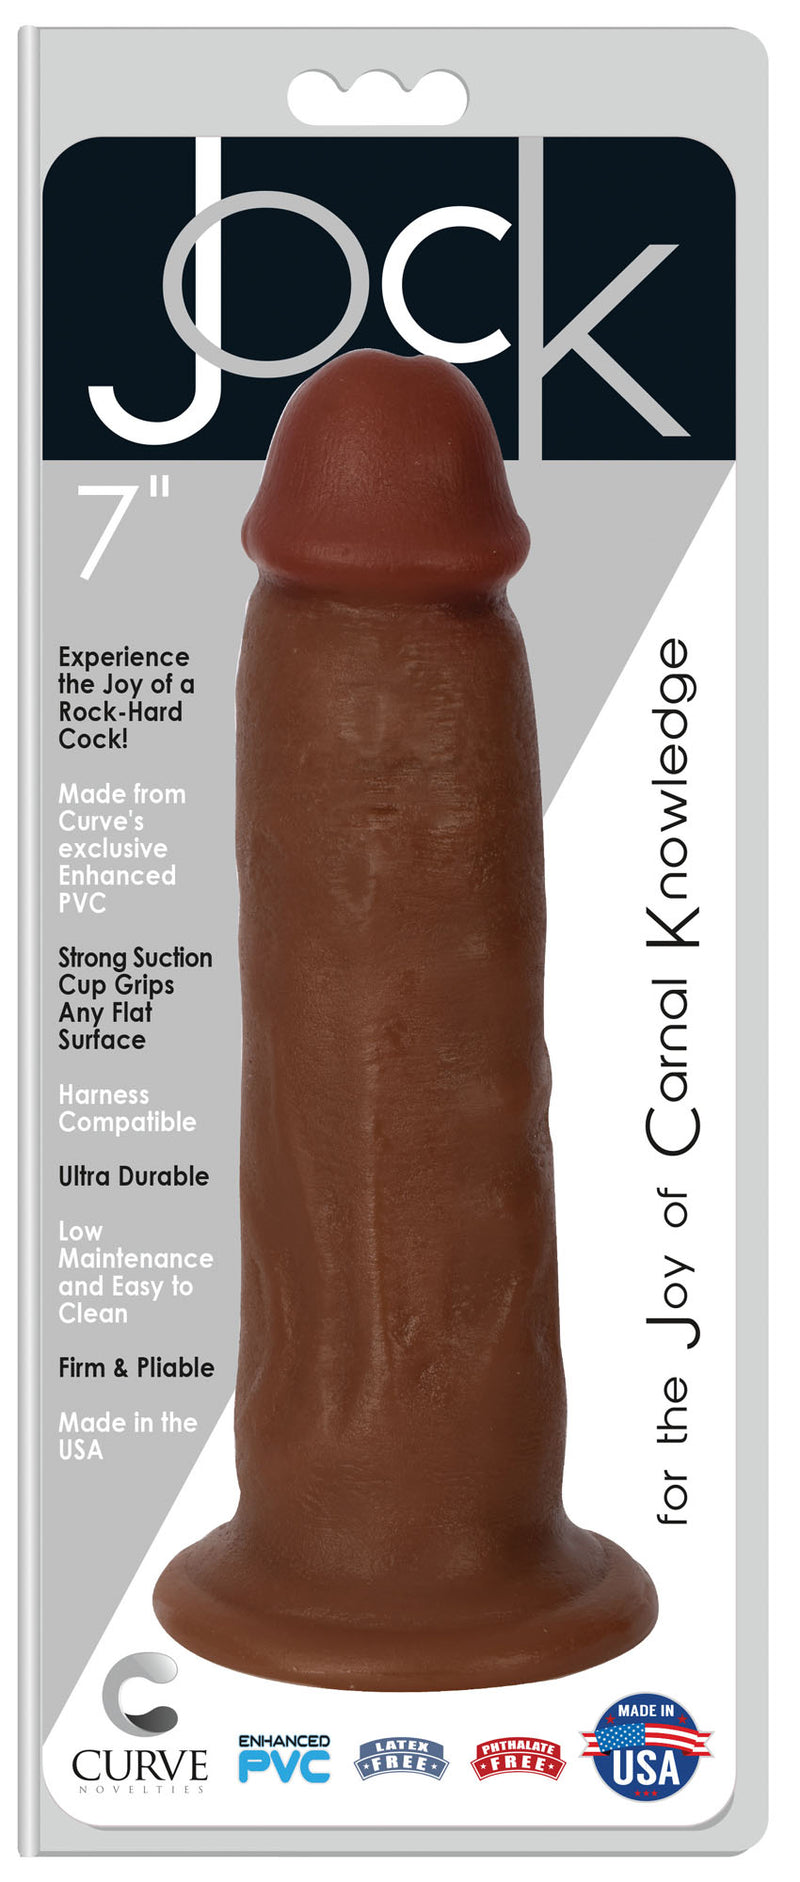 Experience Ultimate Pleasure with Our Suction Cup Dildos - Harness Compatible and Phthalate Free!